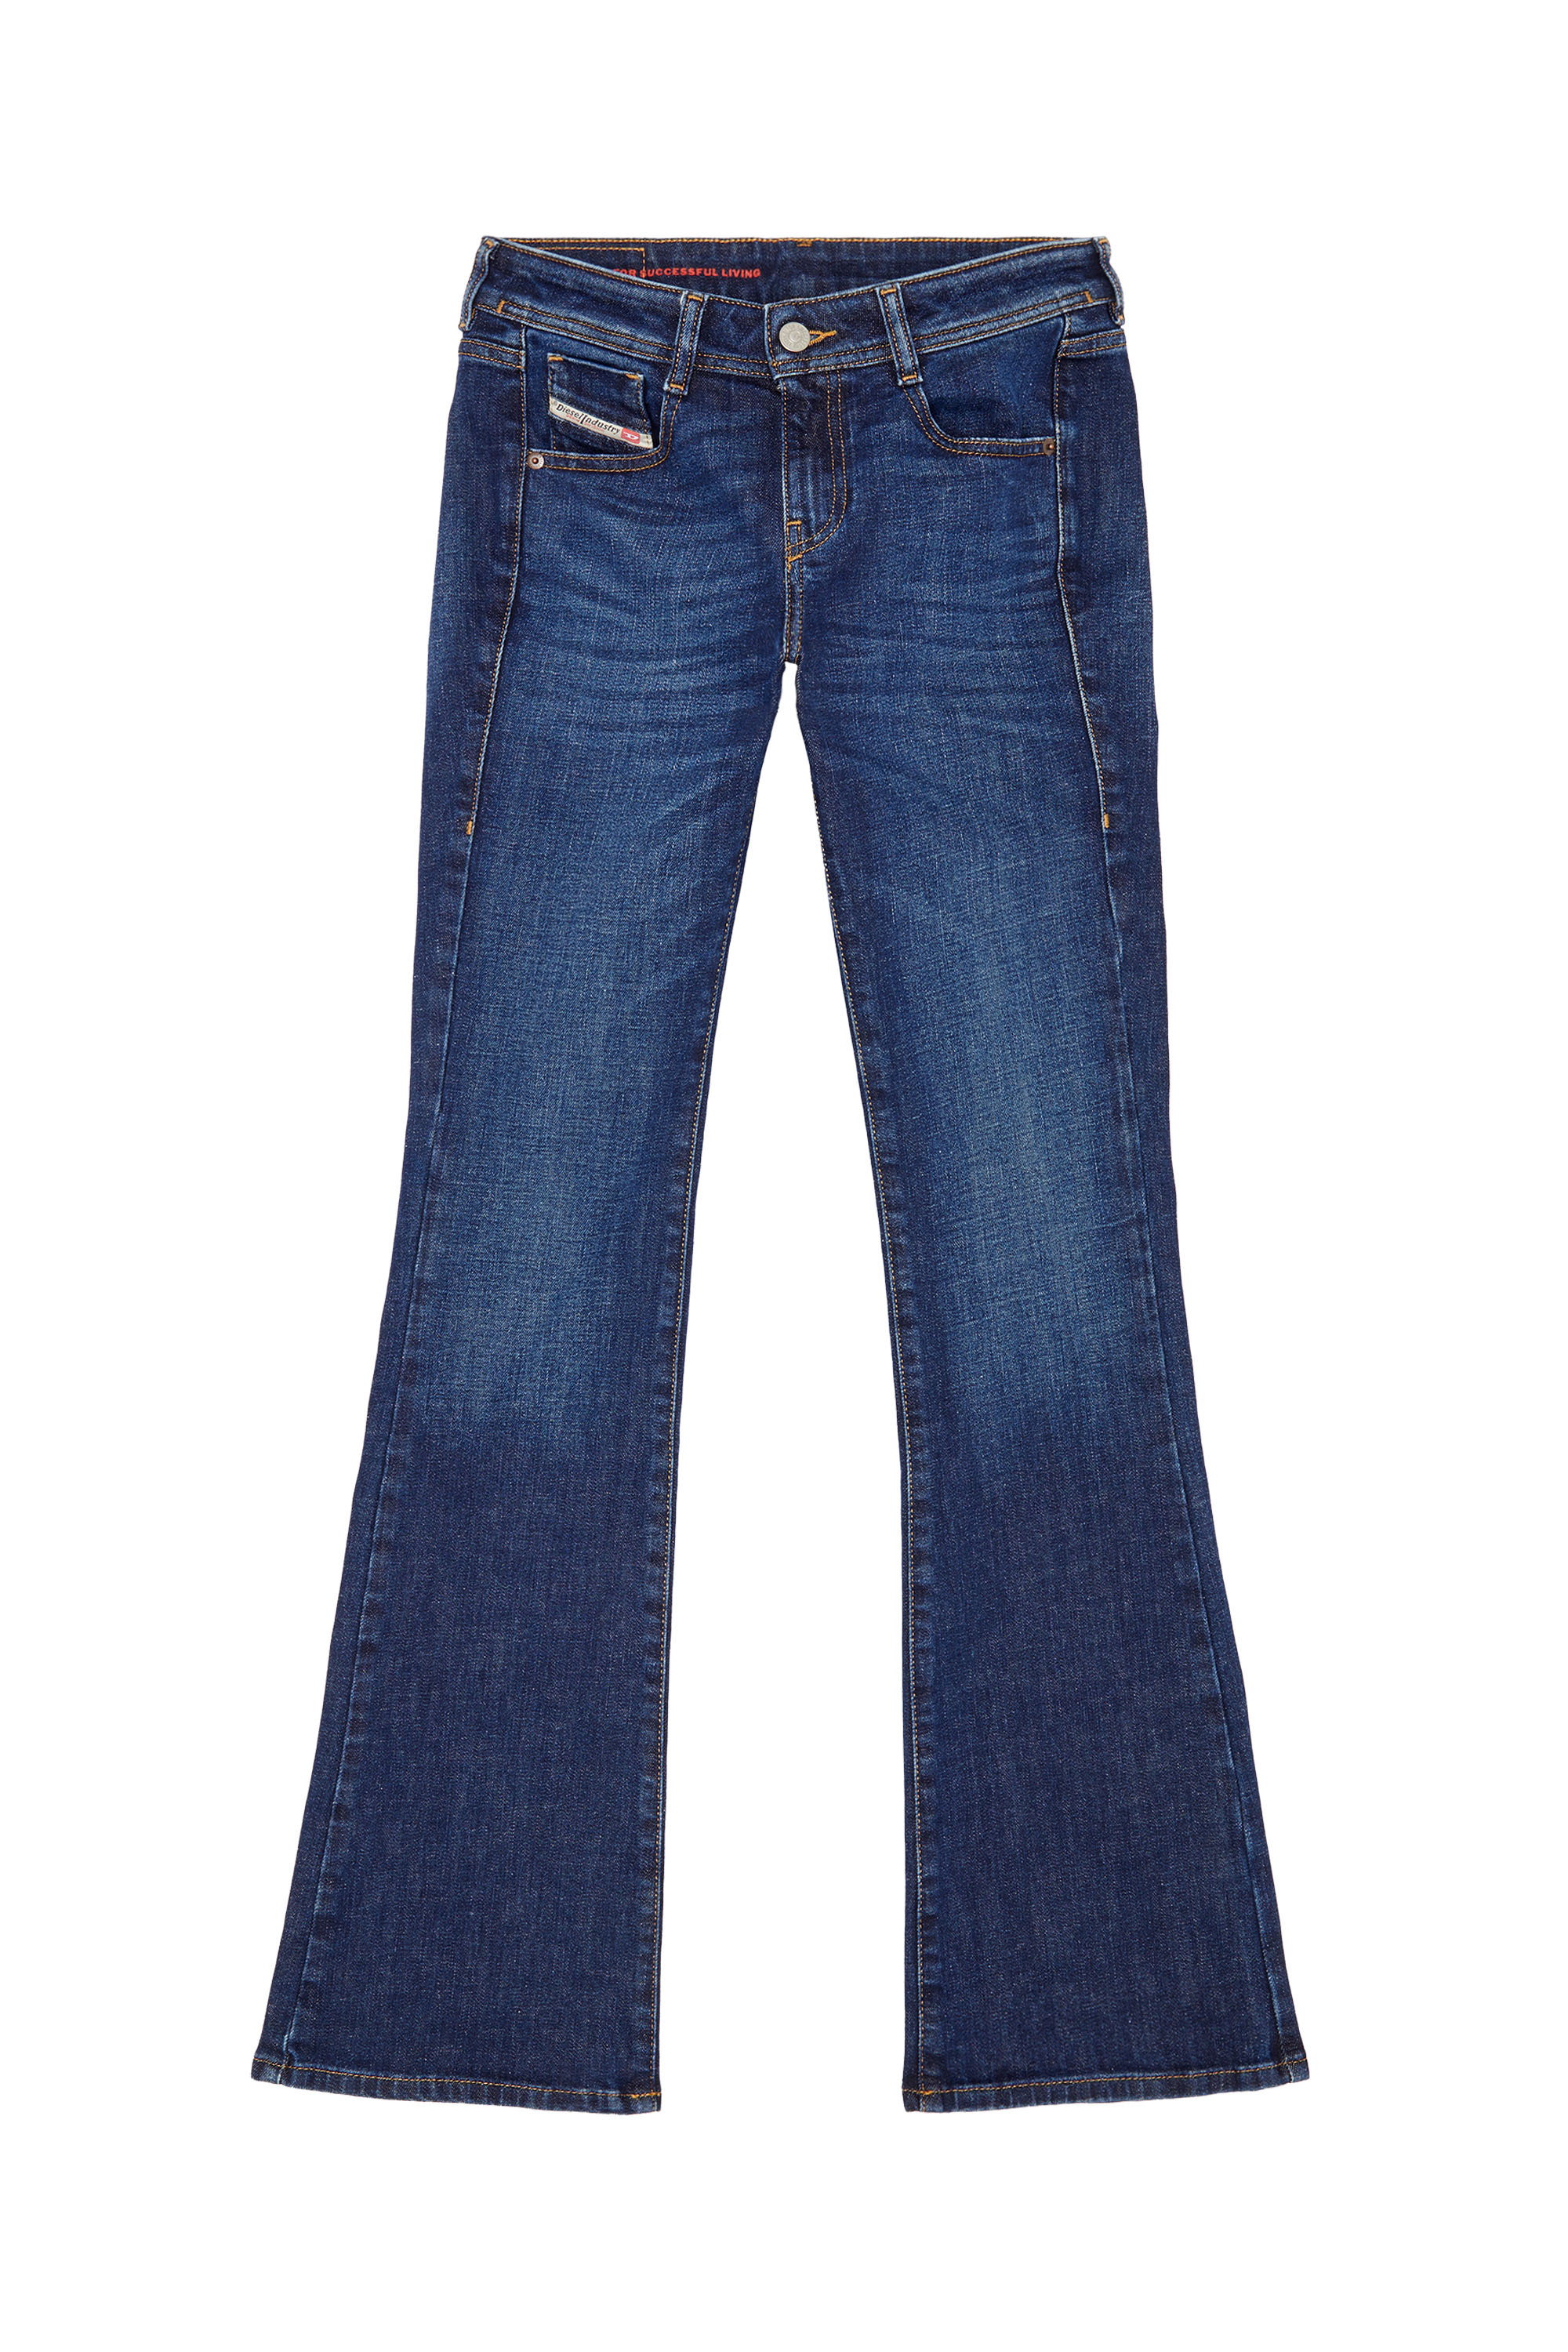 1969 D-Ebbey 09B90 Bootcut and Flare Jeans, Dark Blue